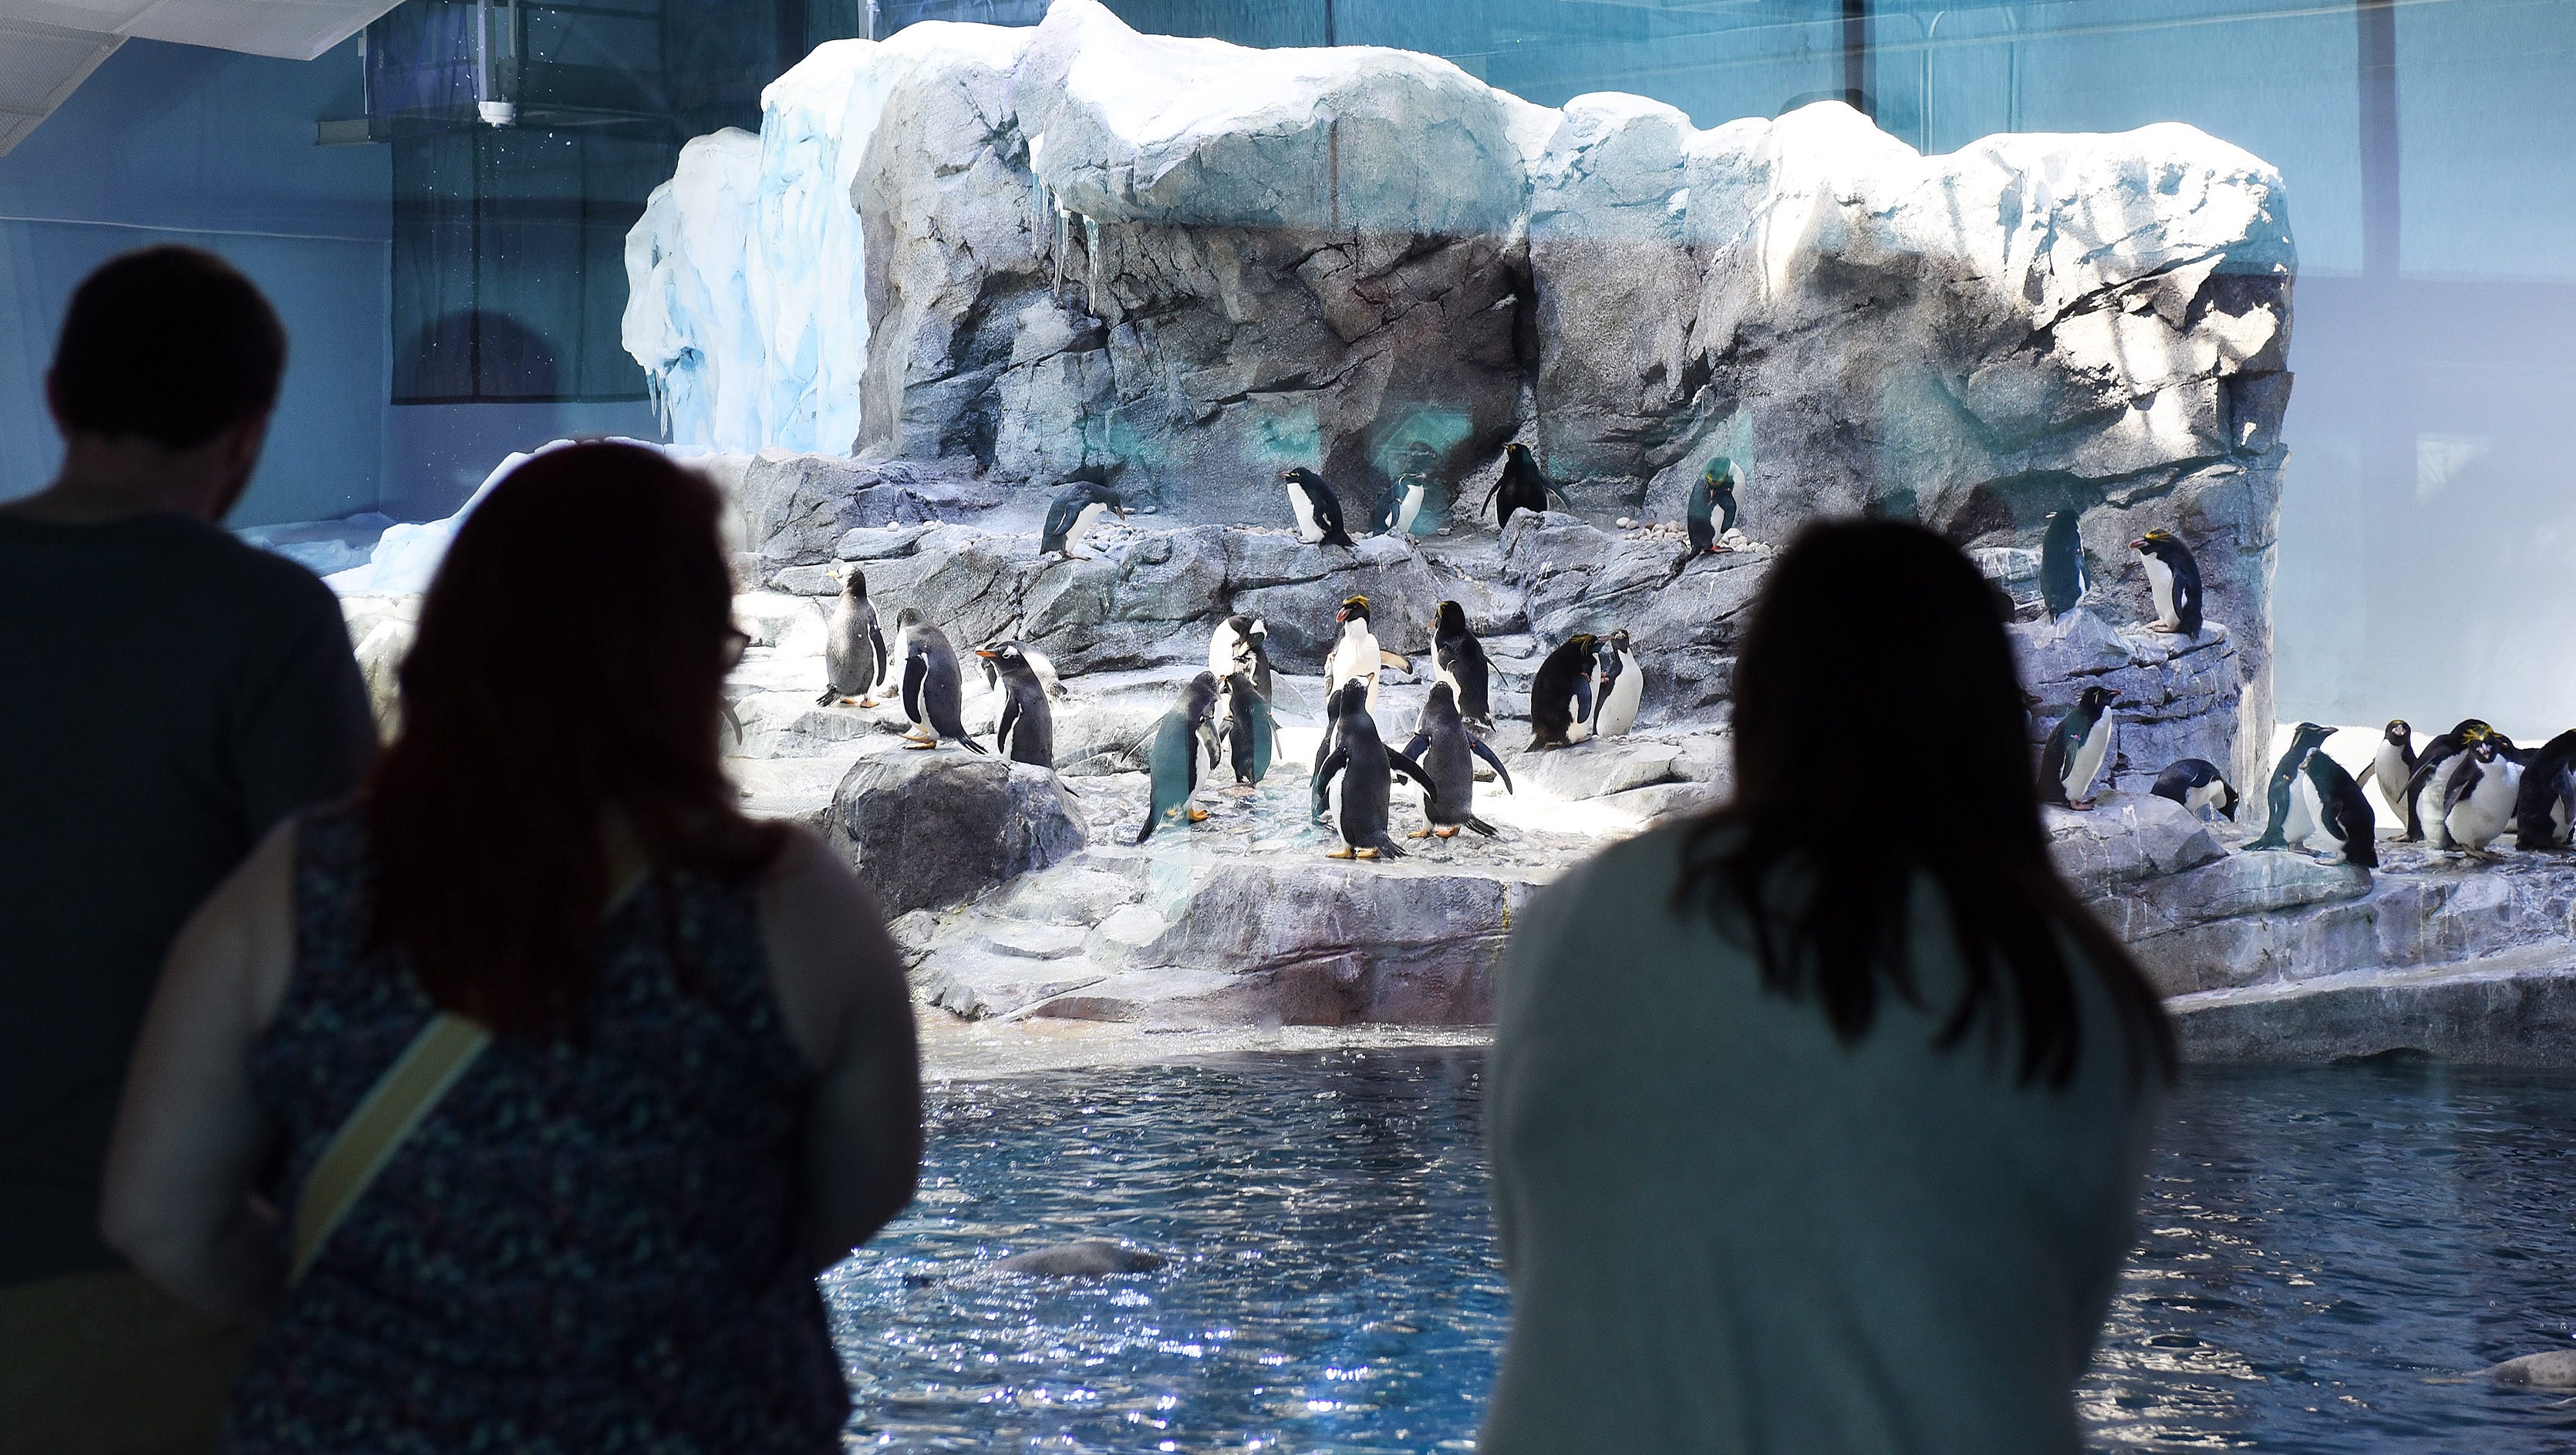 Visitors look at the penguins at the Polk Penguin Conservation Center at the Detroit Zoo on Apr. 18, 2016. Today is the first public day for the penguin conservation center.